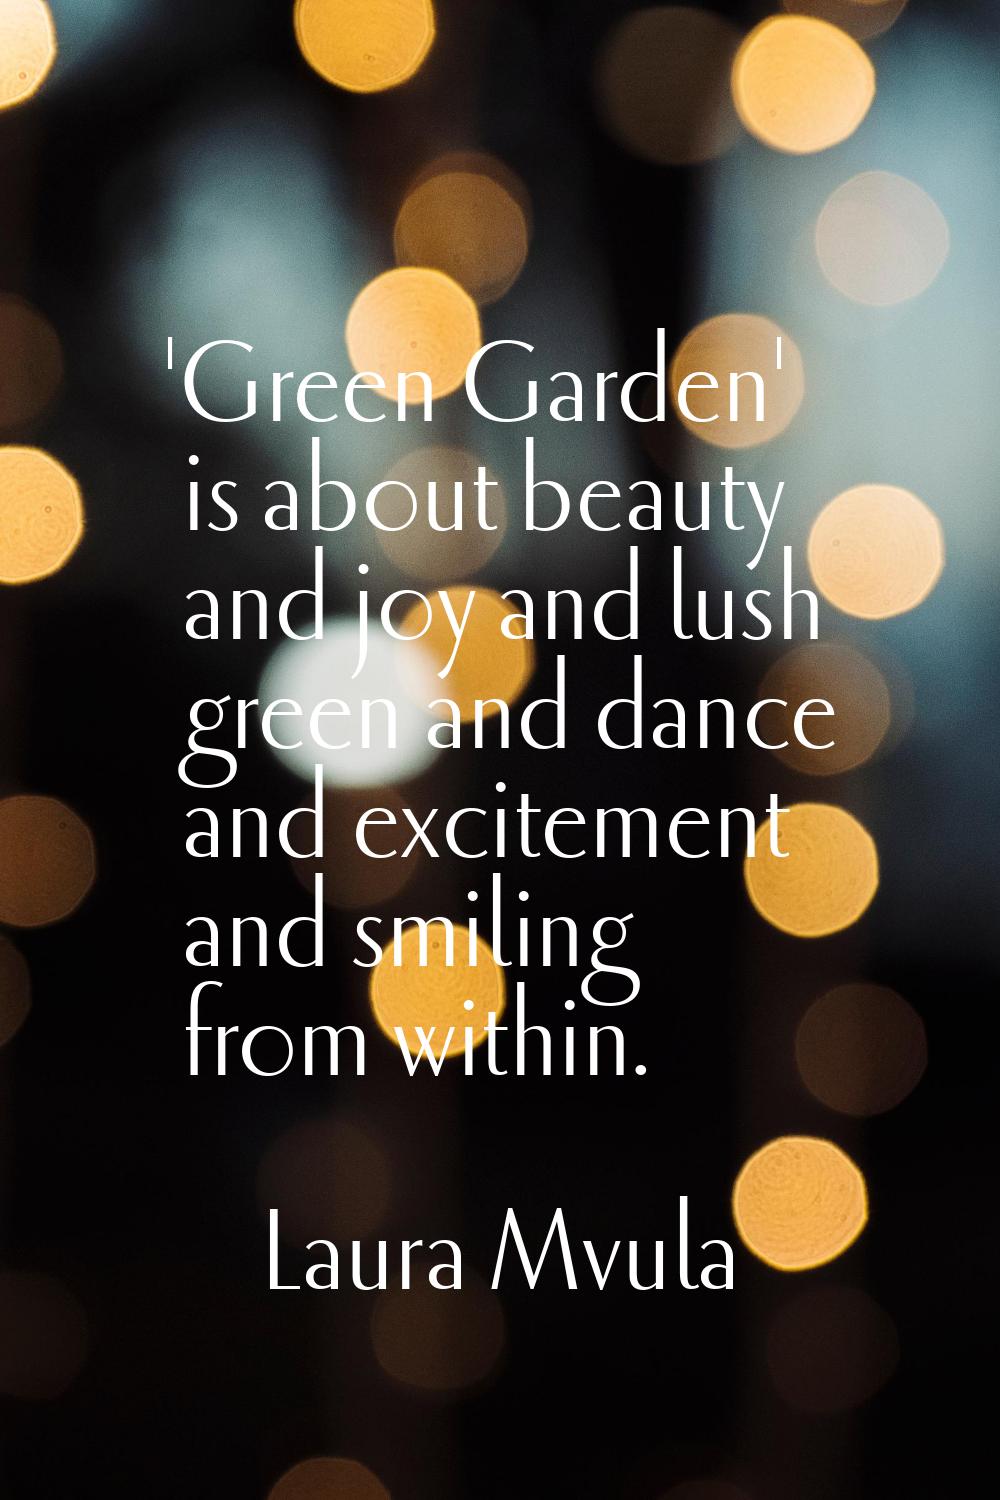 'Green Garden' is about beauty and joy and lush green and dance and excitement and smiling from wit